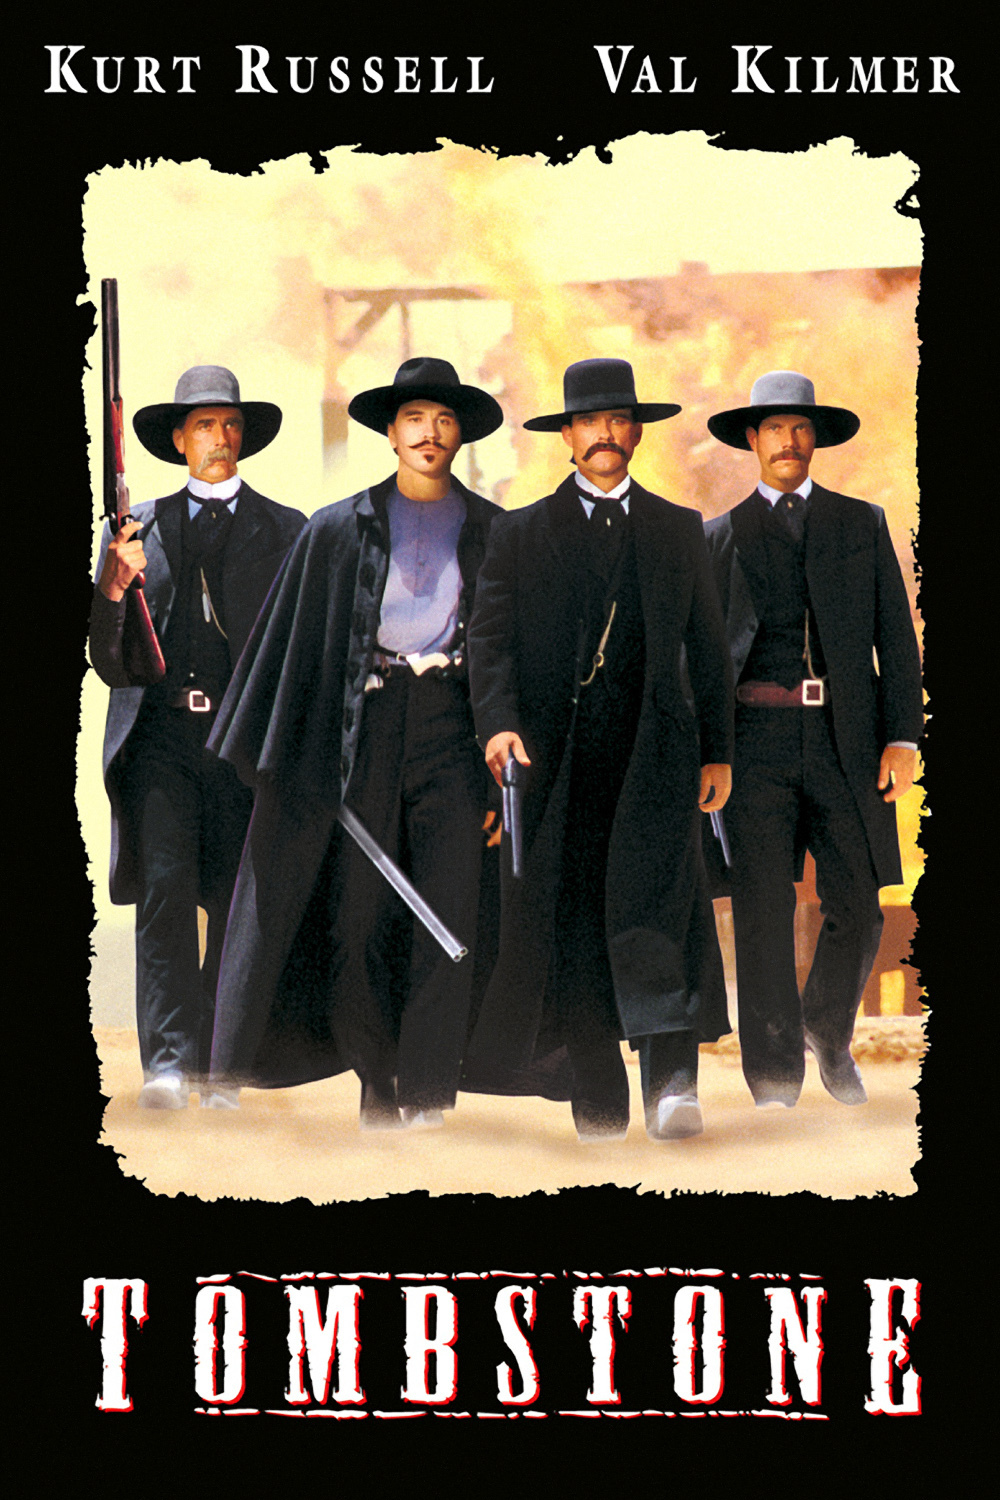 An analysis of the western movie tombstone